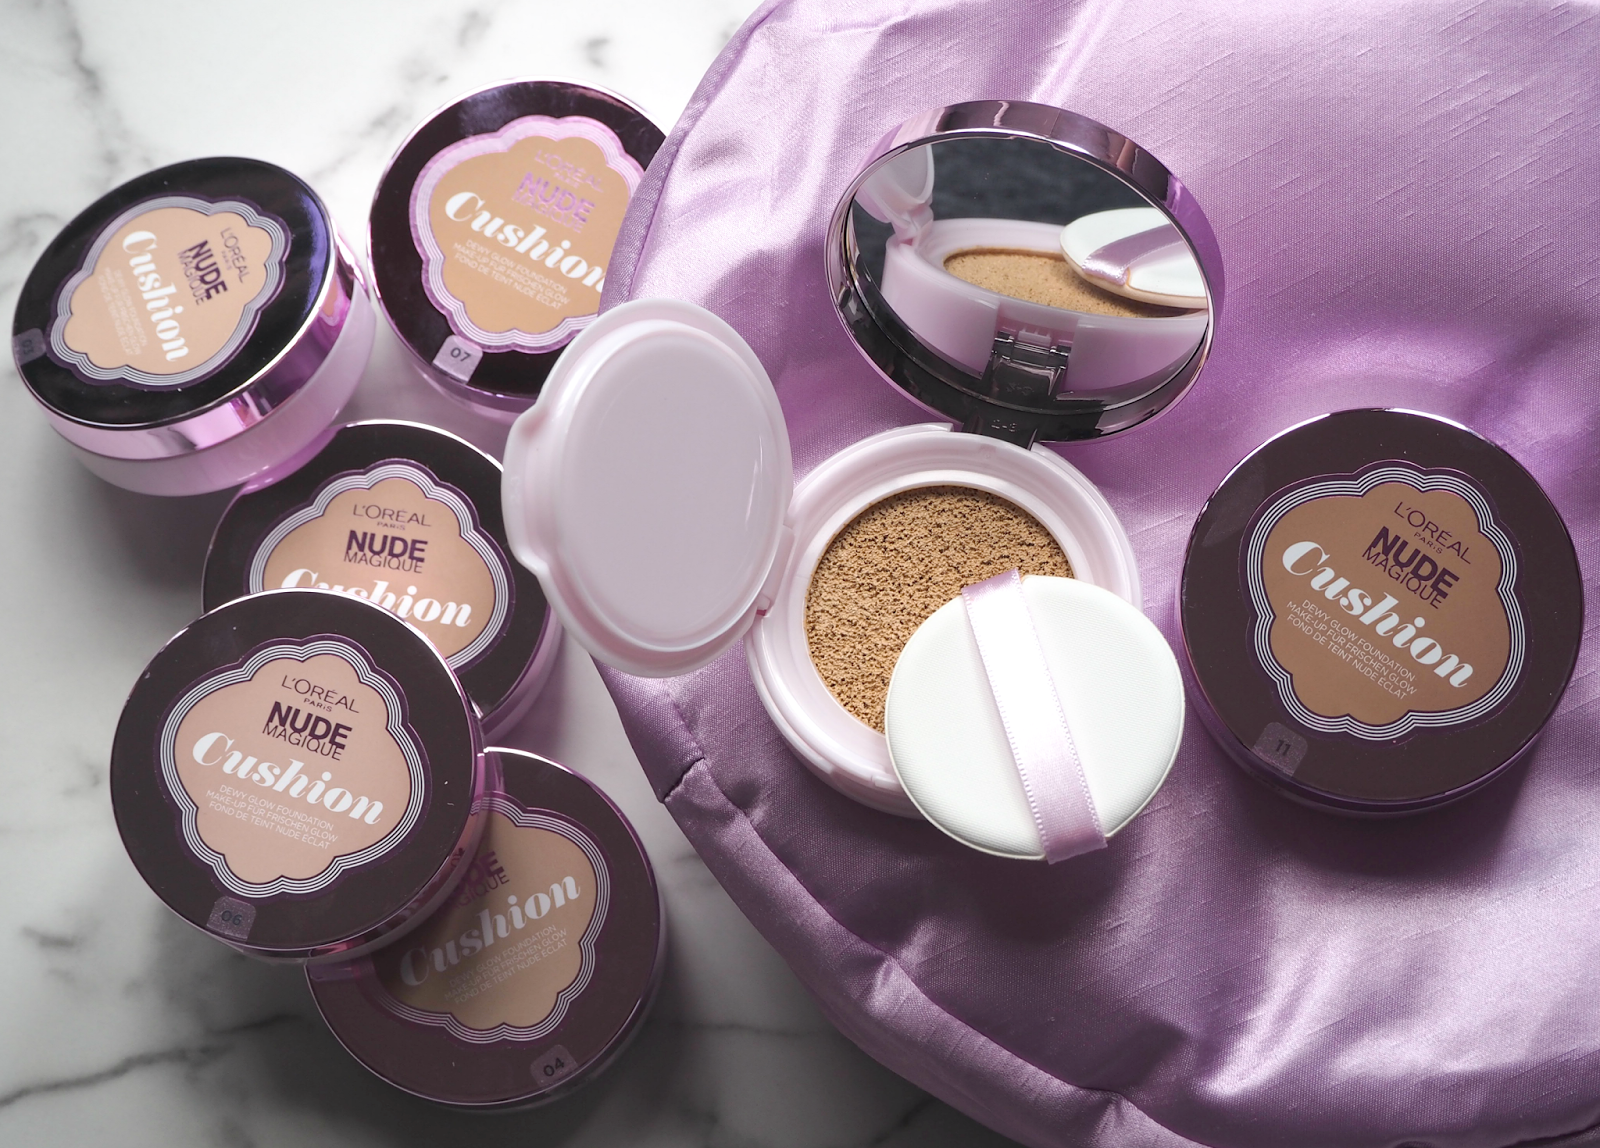 Finally, There's A High Street Version NEW L'Oreal Nude Magique Cushion Foundation 2